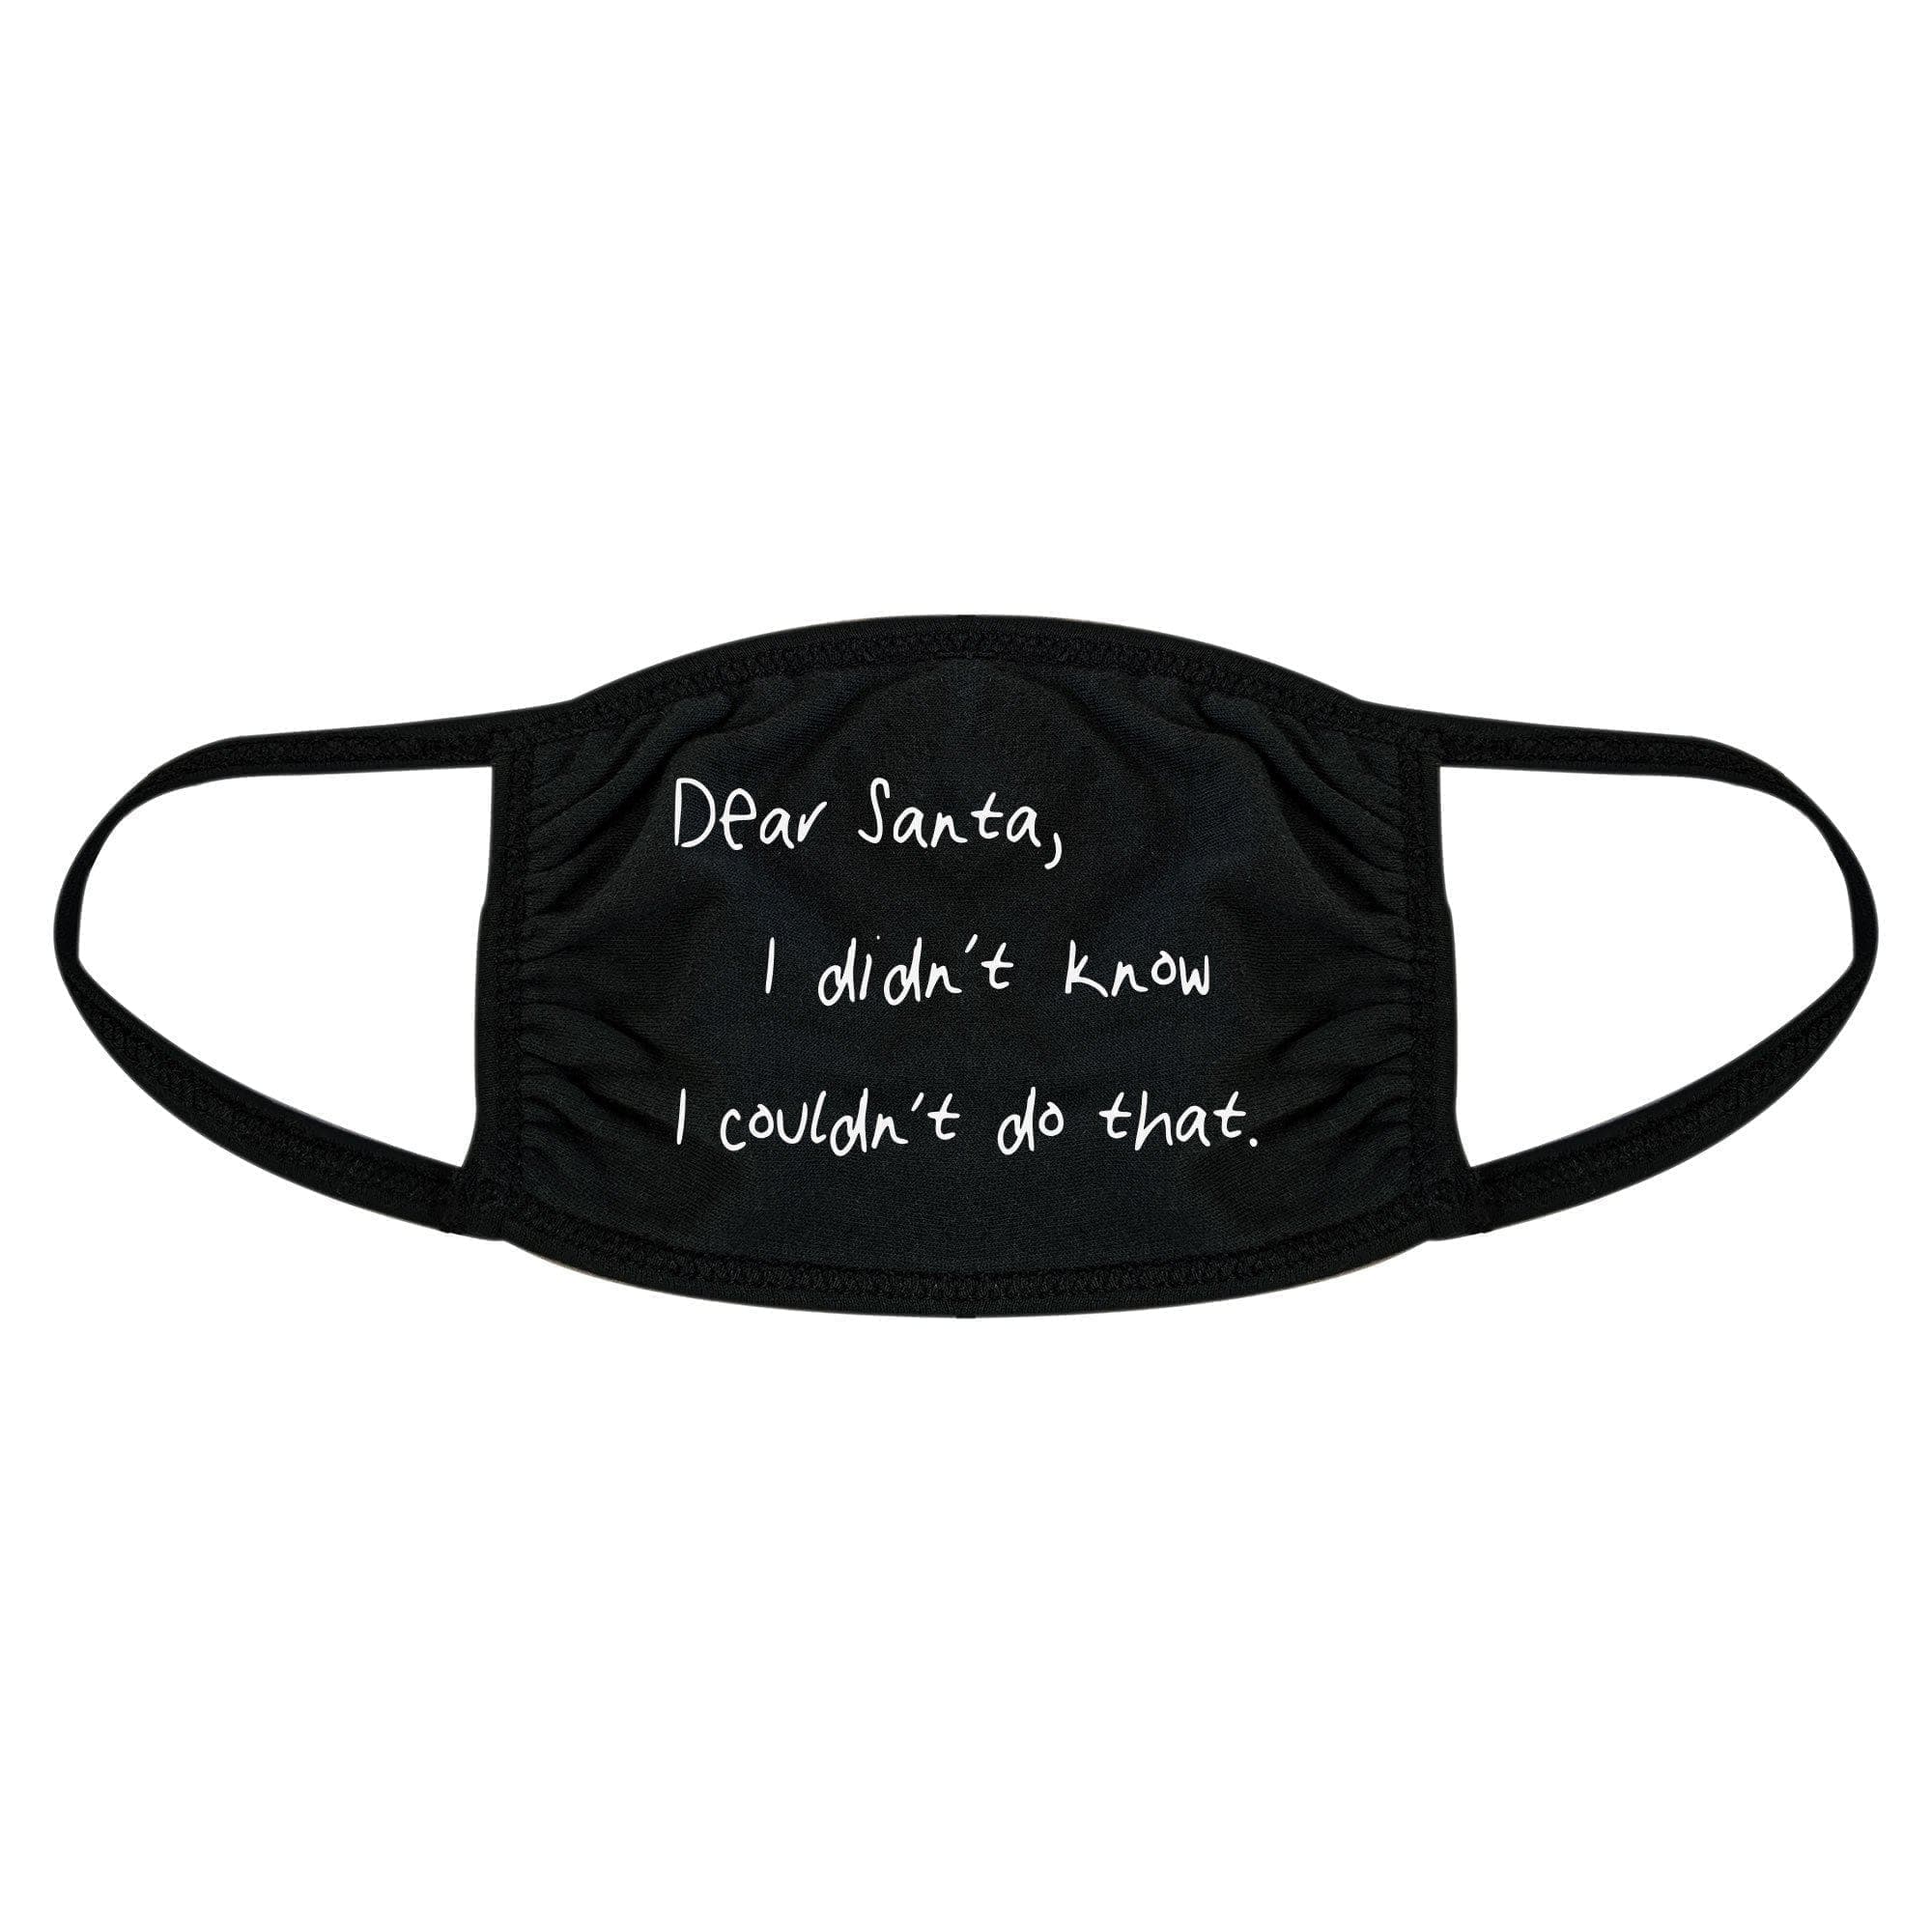 Dear Santa I Didn't Know I Couldn't Do That Face Mask Mask - Crazy Dog T-Shirts